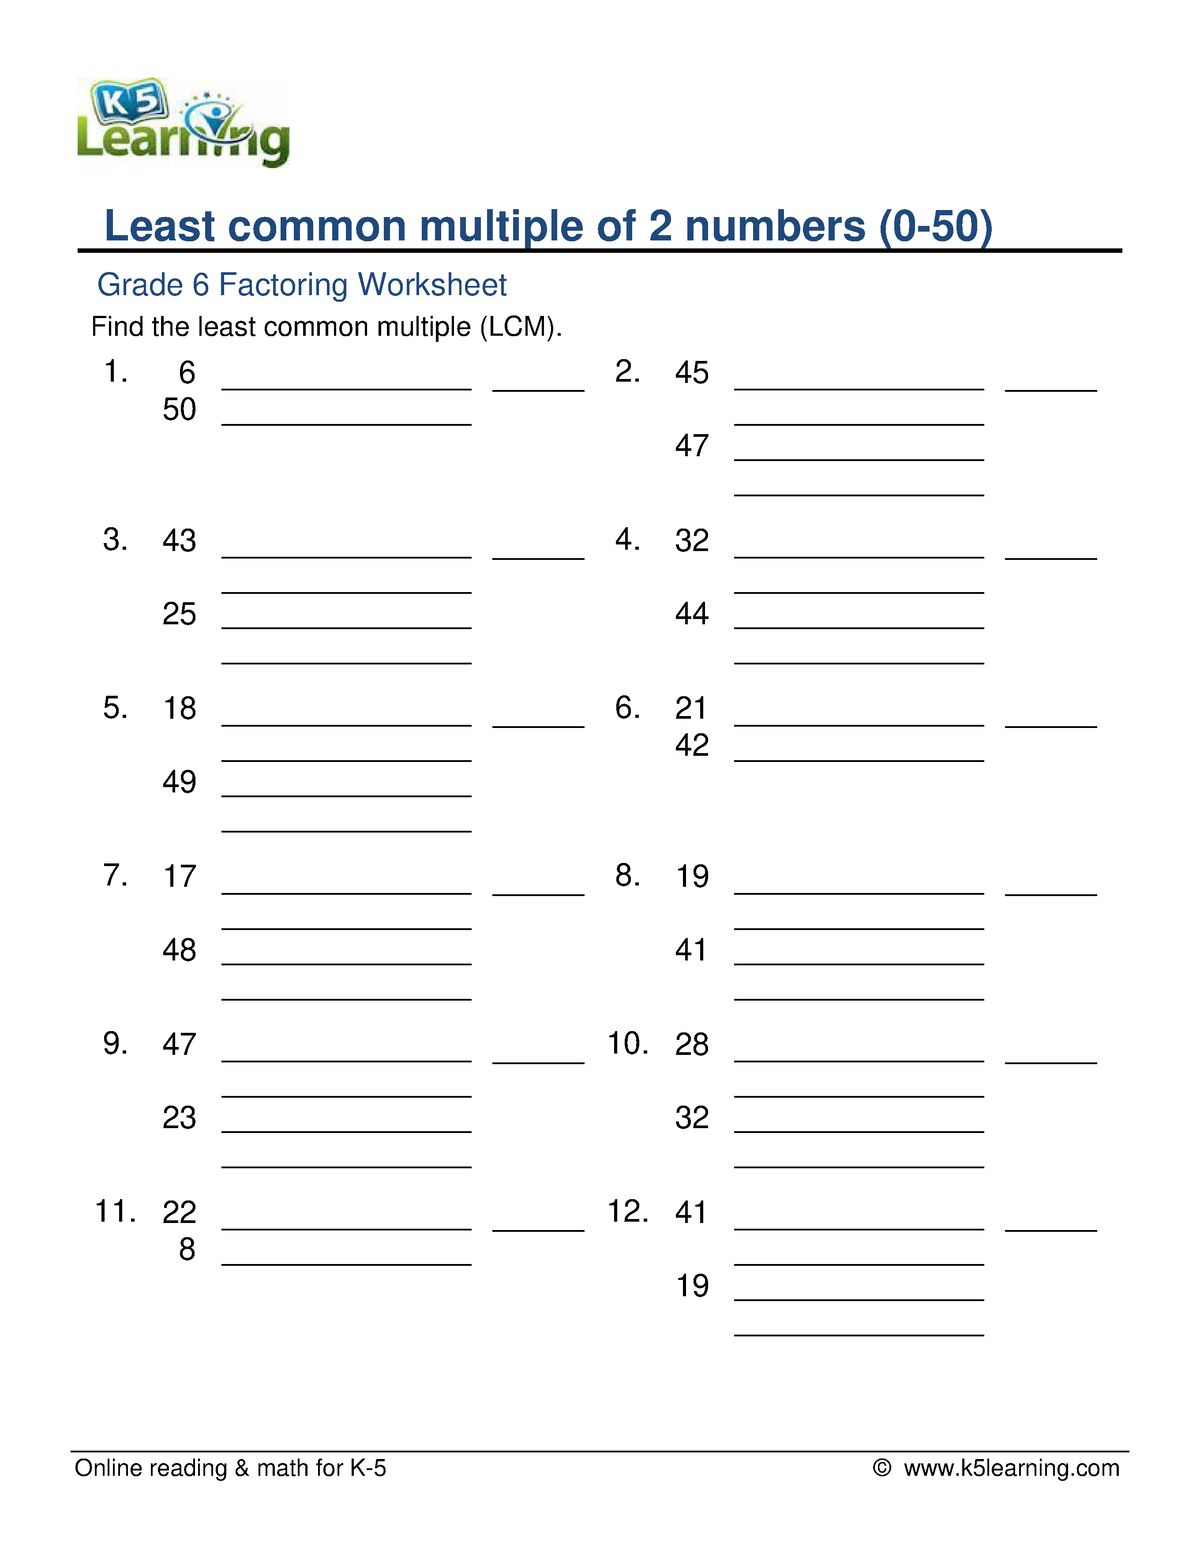 Grade 6 least common multiple lcm 2 numbers 2 50 b - Online reading ...